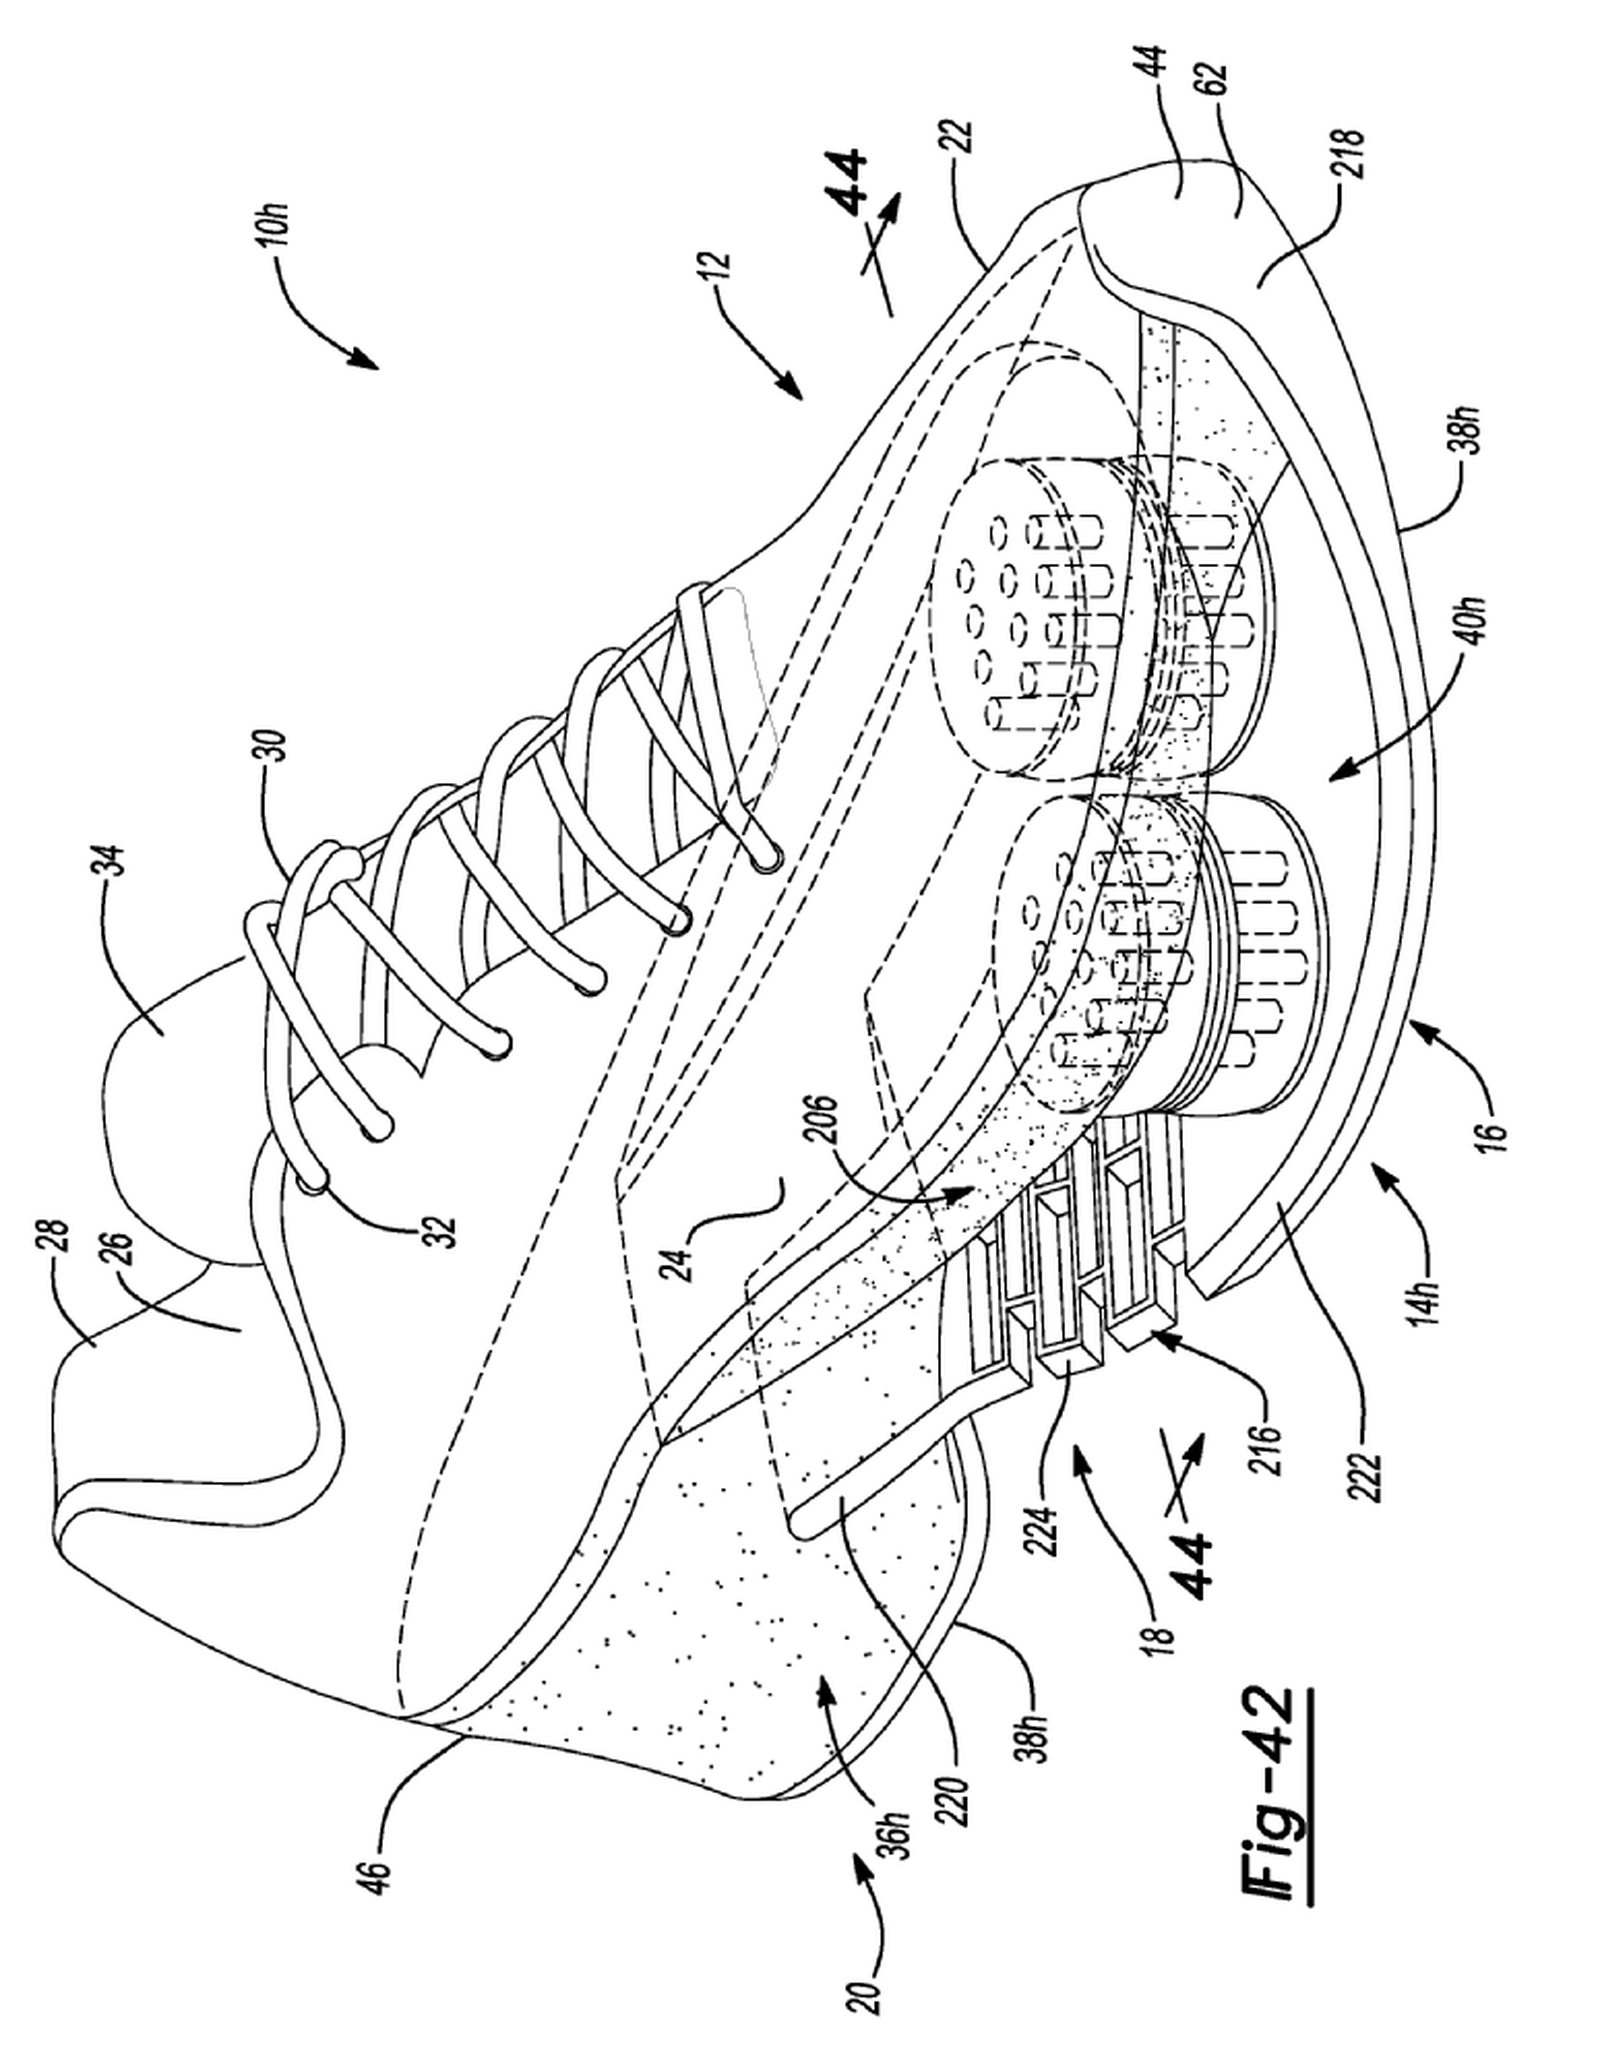 nike-running-shoes-banned-patent-2